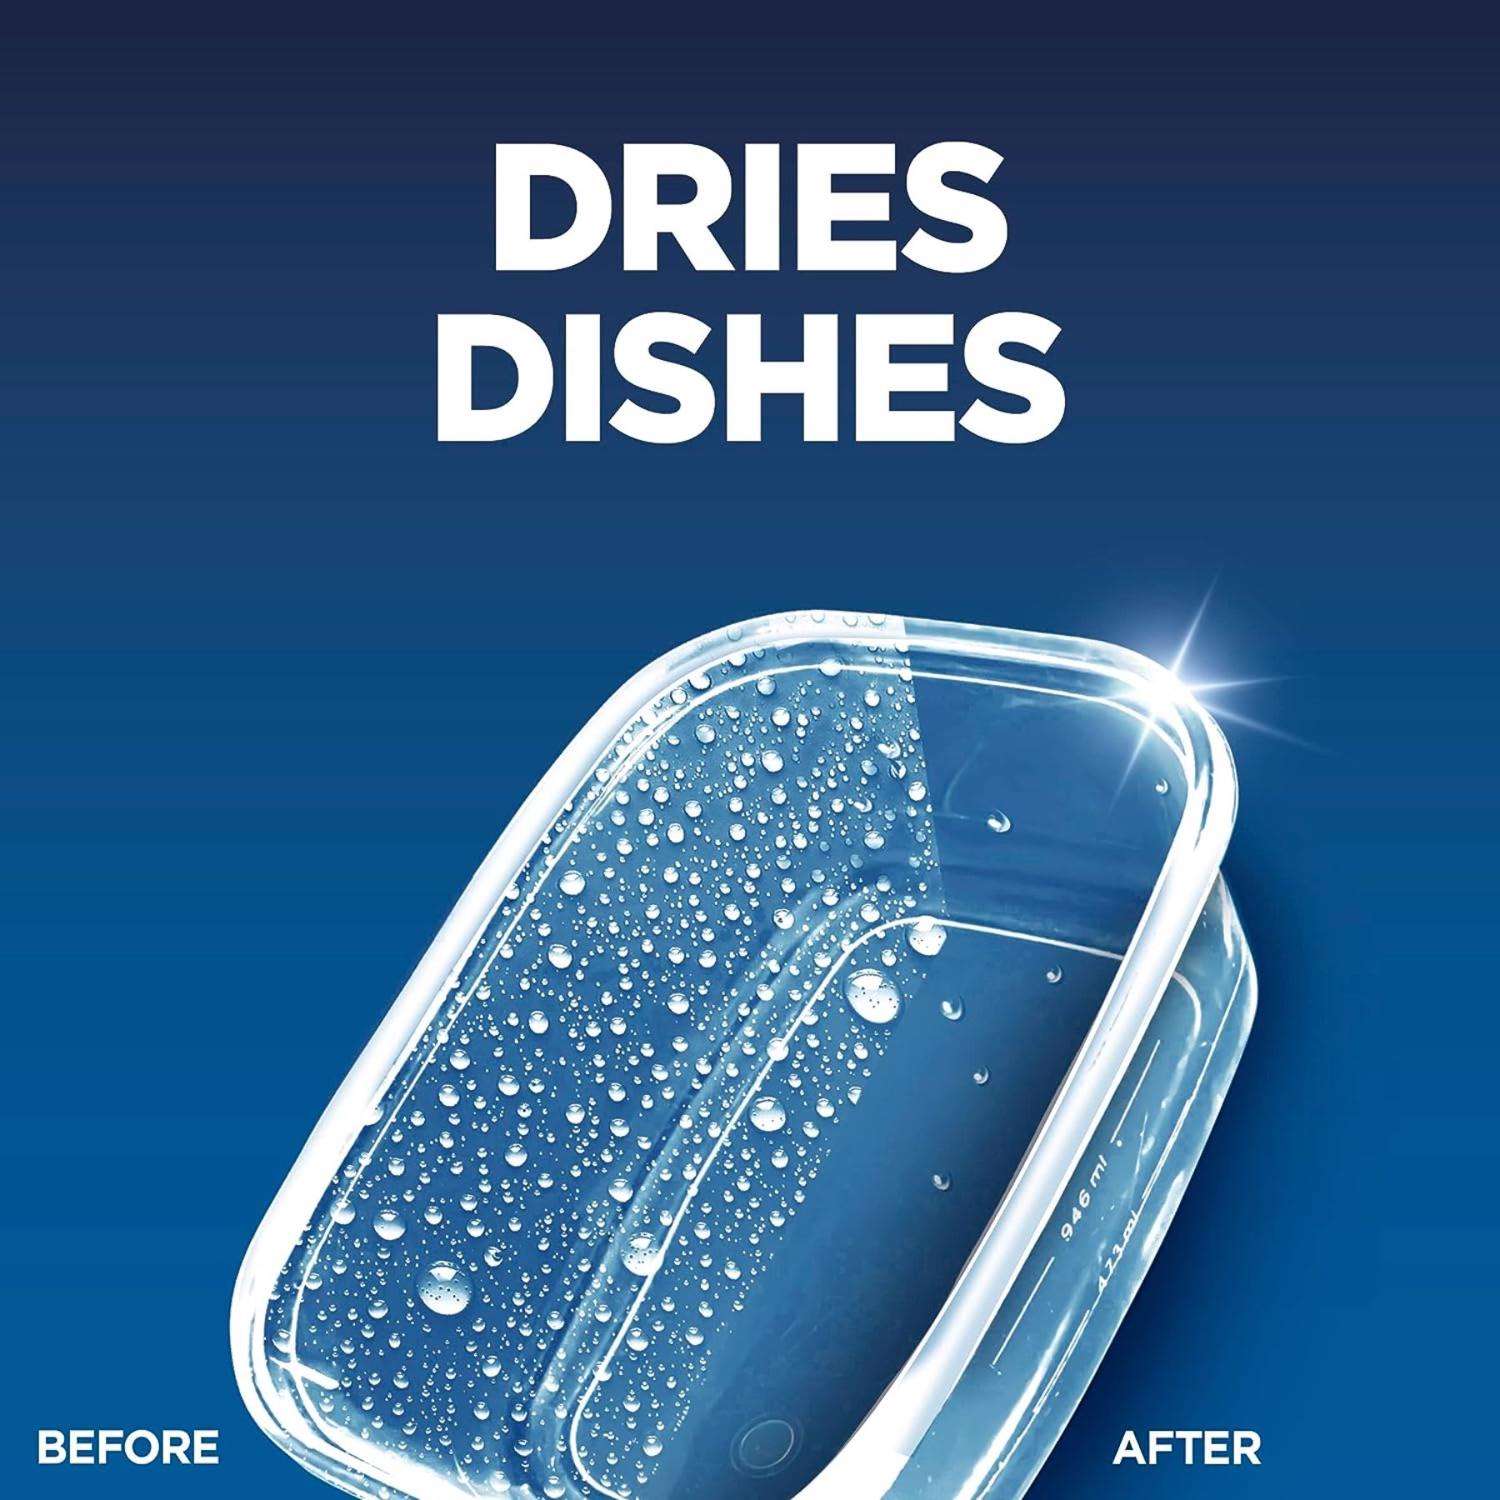 Do You Really Need Jet-Dry In The Dishwasher? YES!